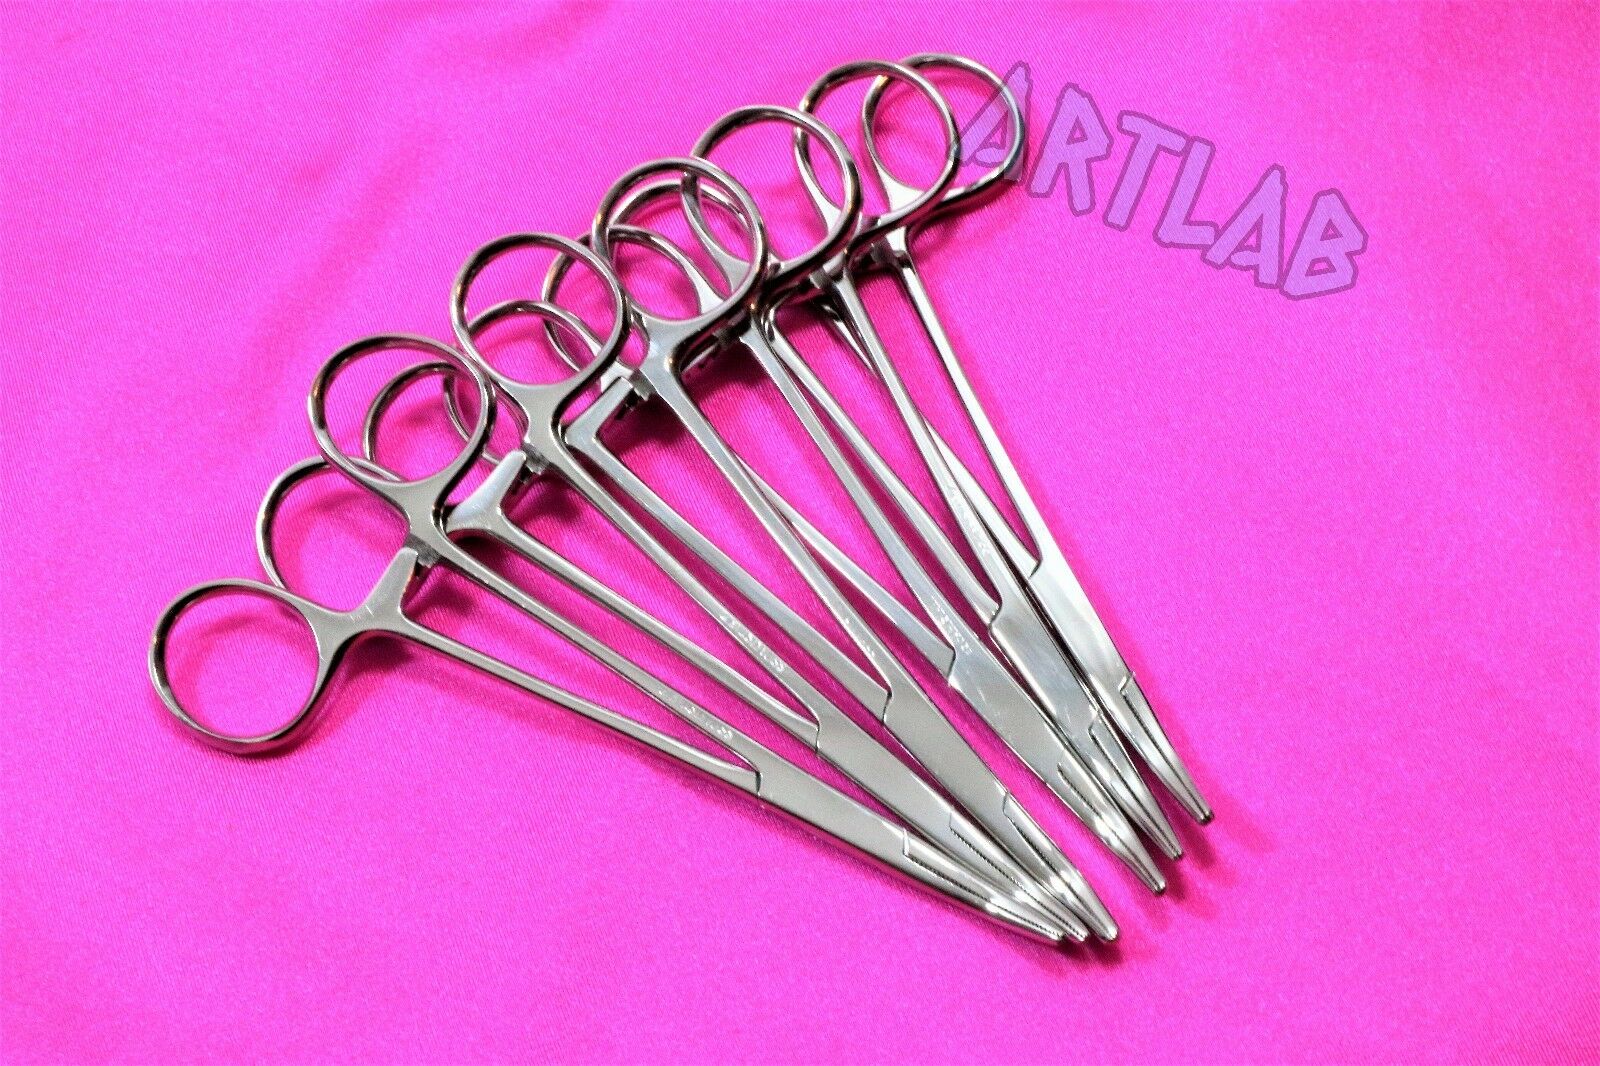 6 Pc Mosquito Hemostat Forceps 5" Curved Stainless Steel Surgical Medical